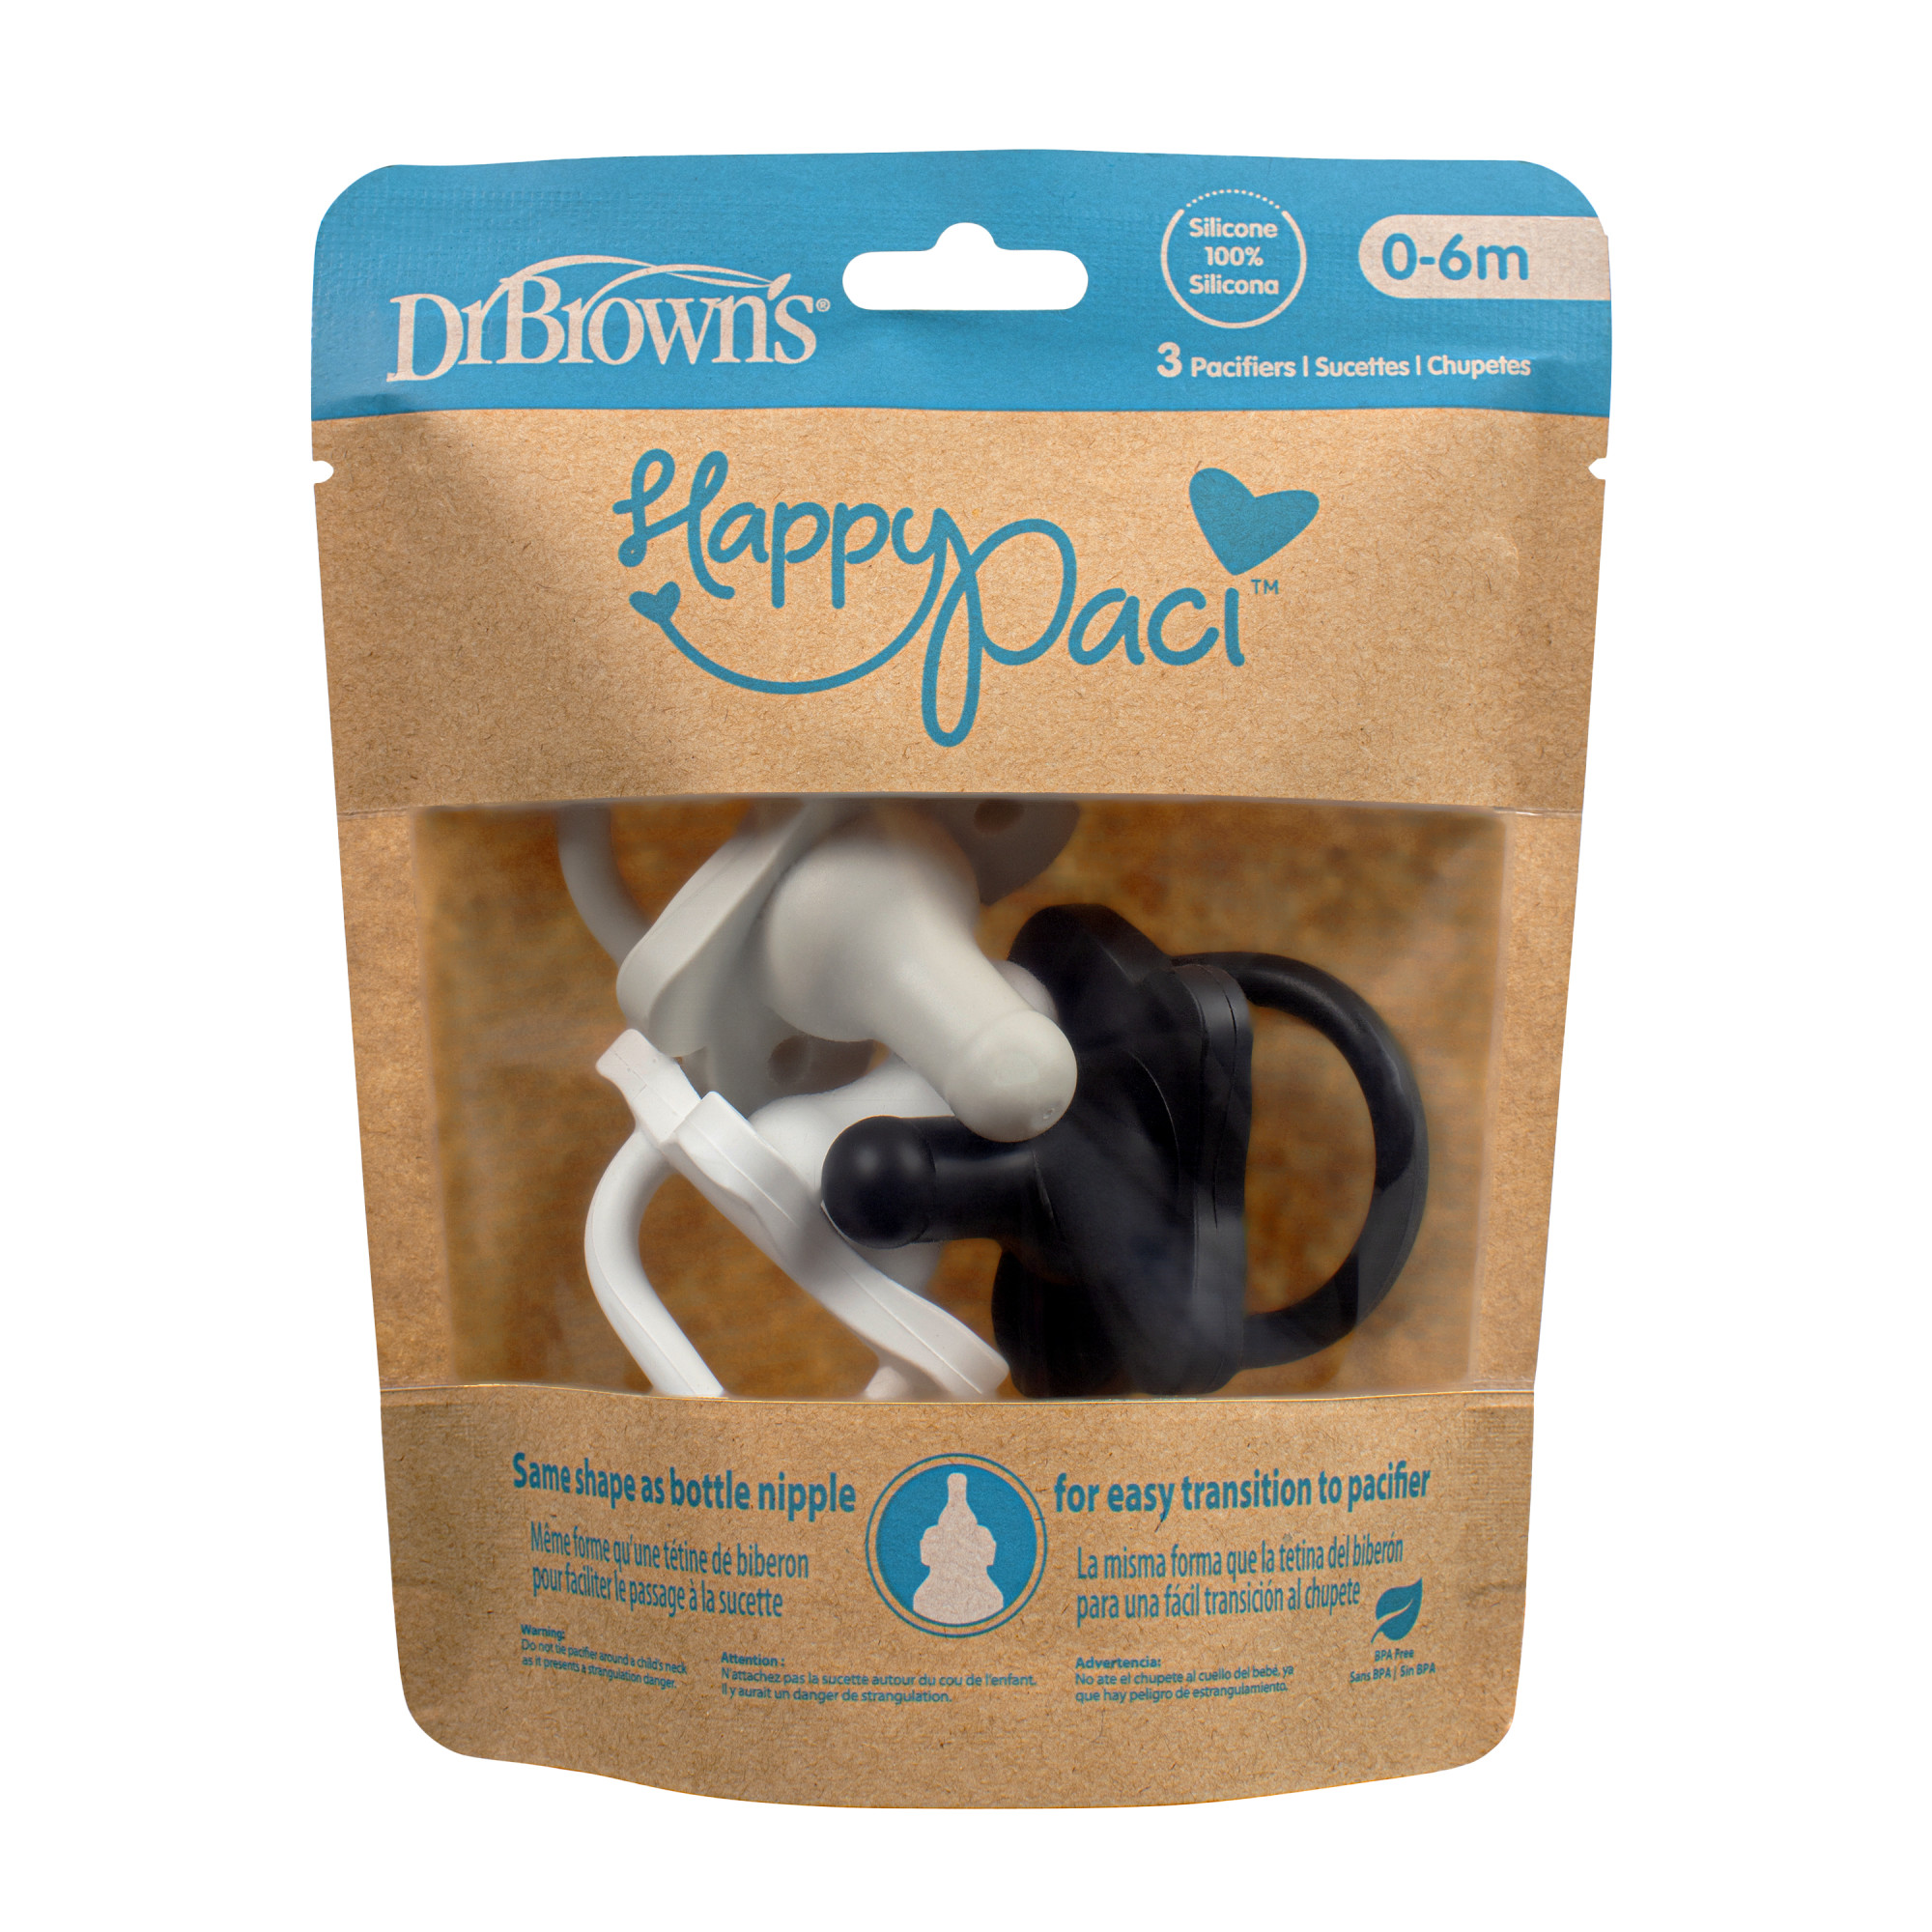 Dr. Brown's HappyPaci 100% Silicone Baby Pacifier, 0-6m, BPA-Free, Black/Cool Gray/White, 3 Pack - image 3 of 19